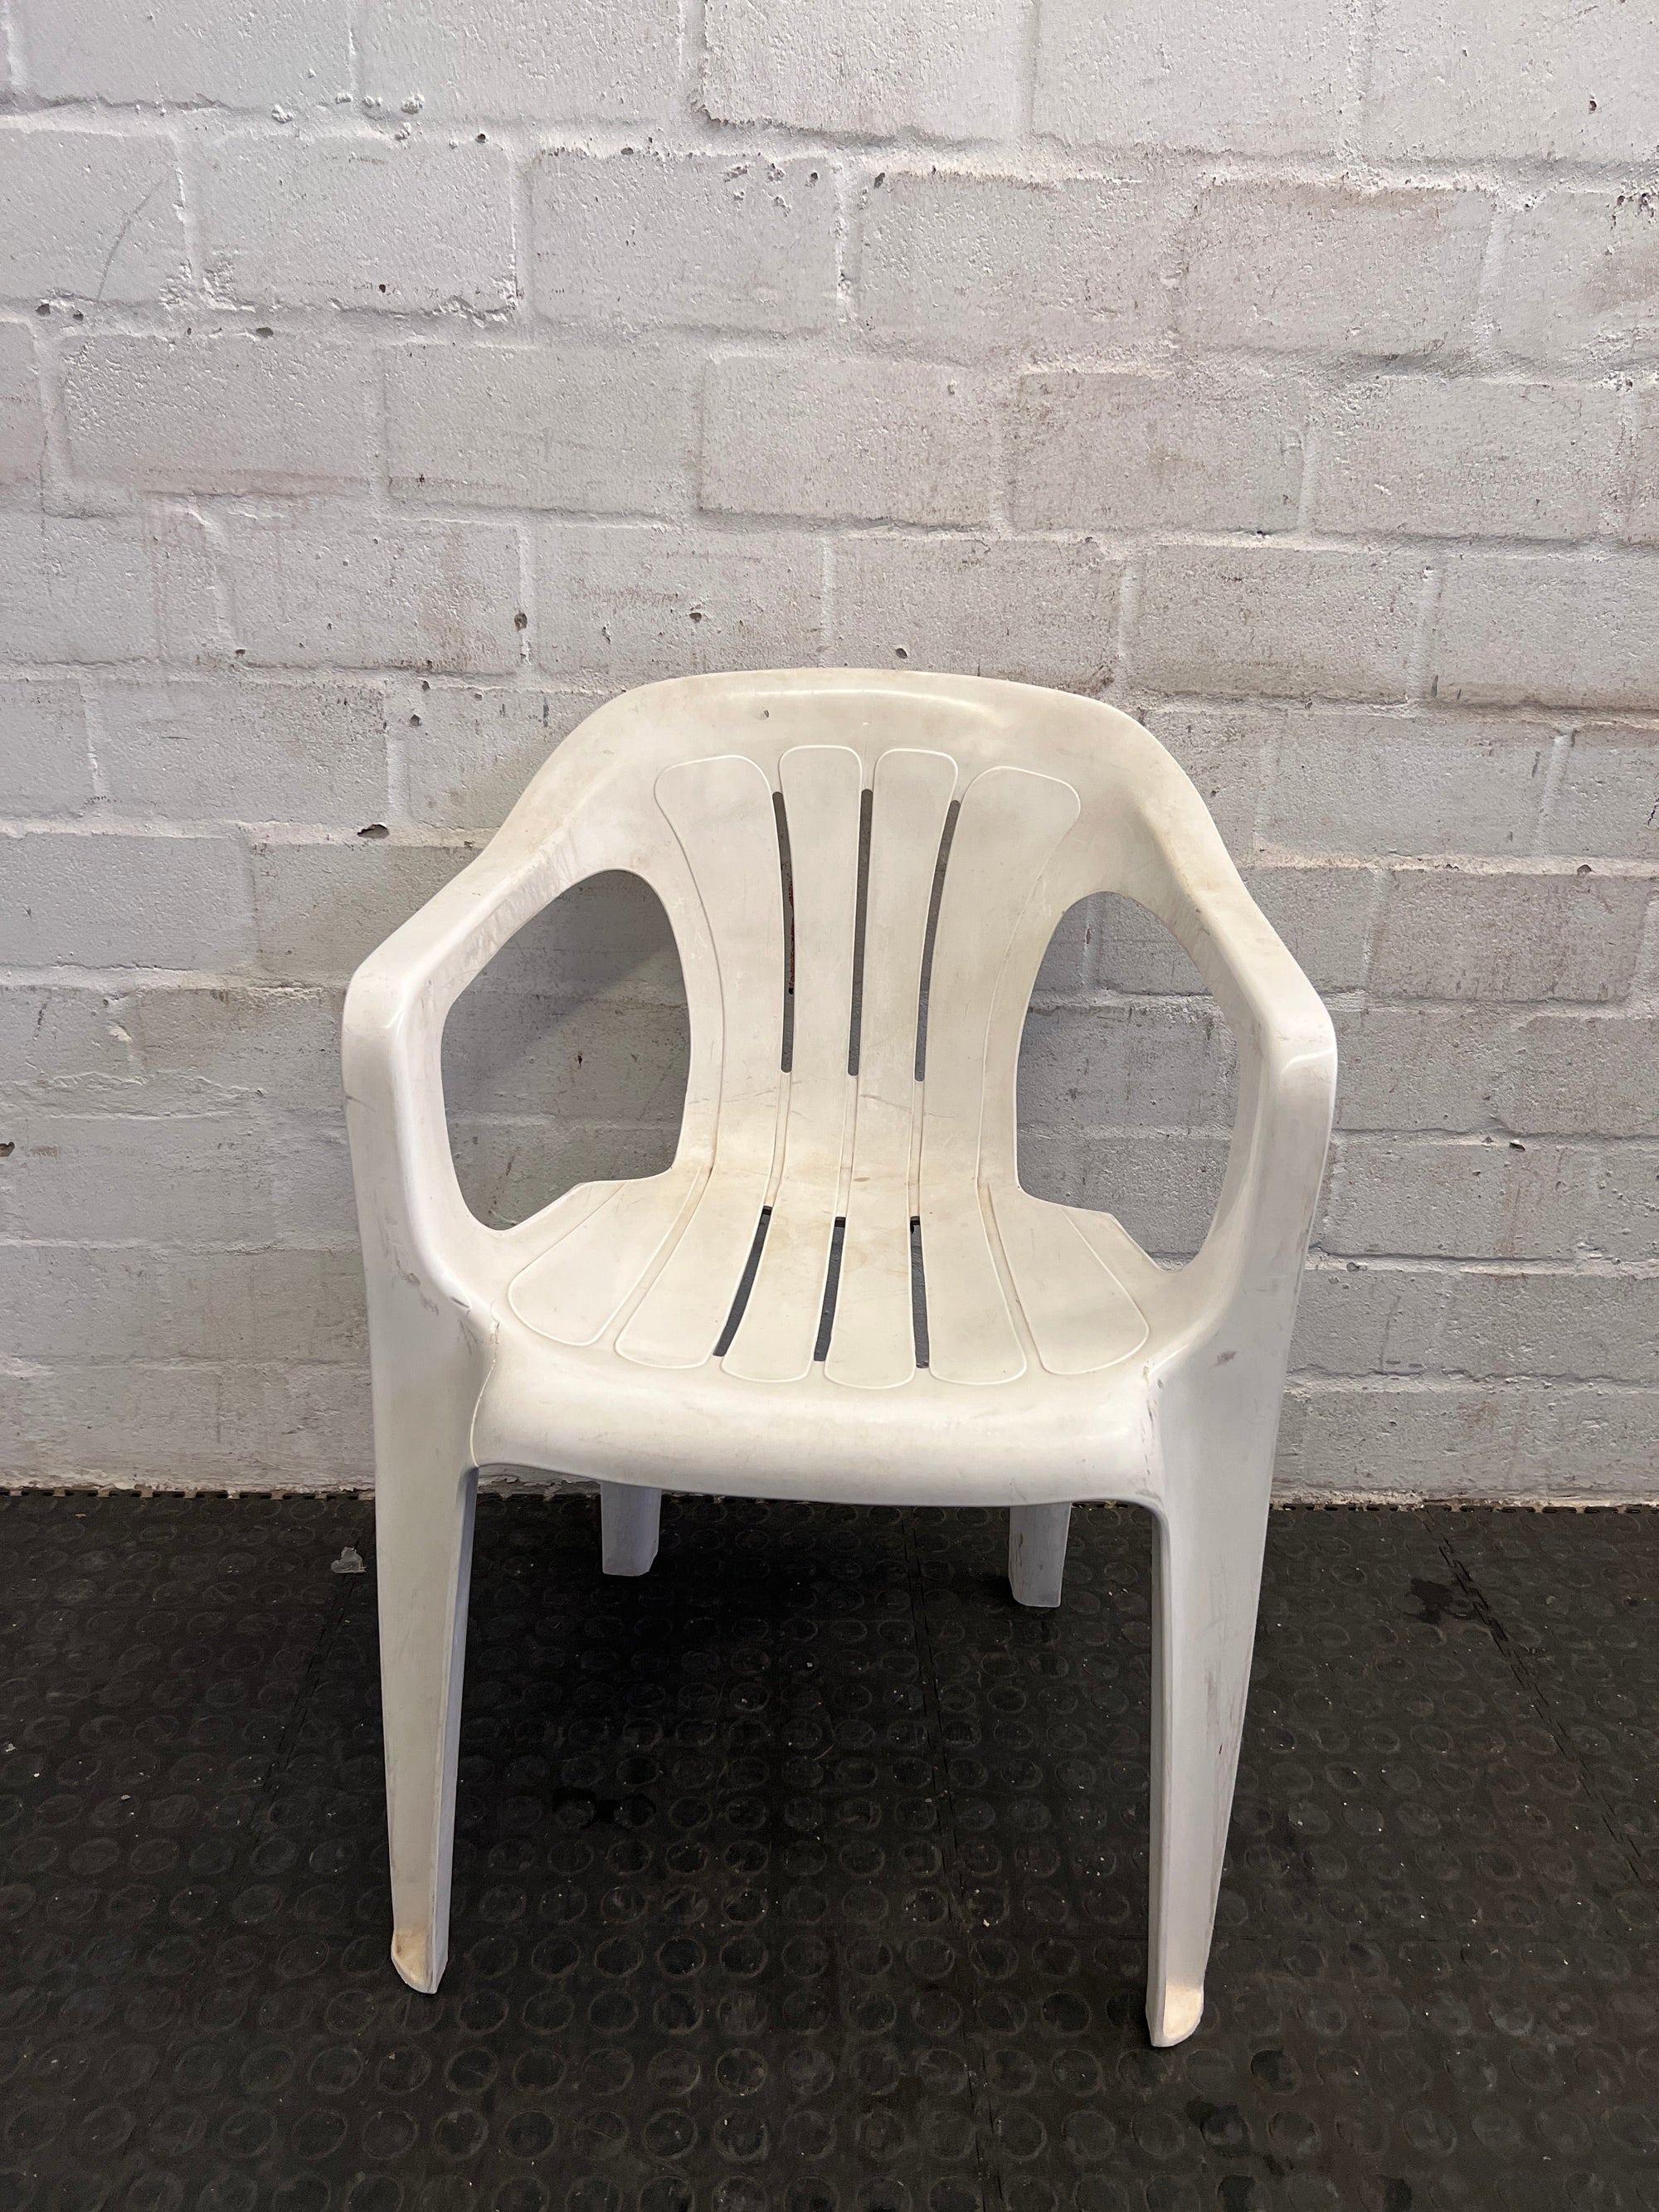 White Plastic Outdoor Chairs(Scuff Marks)